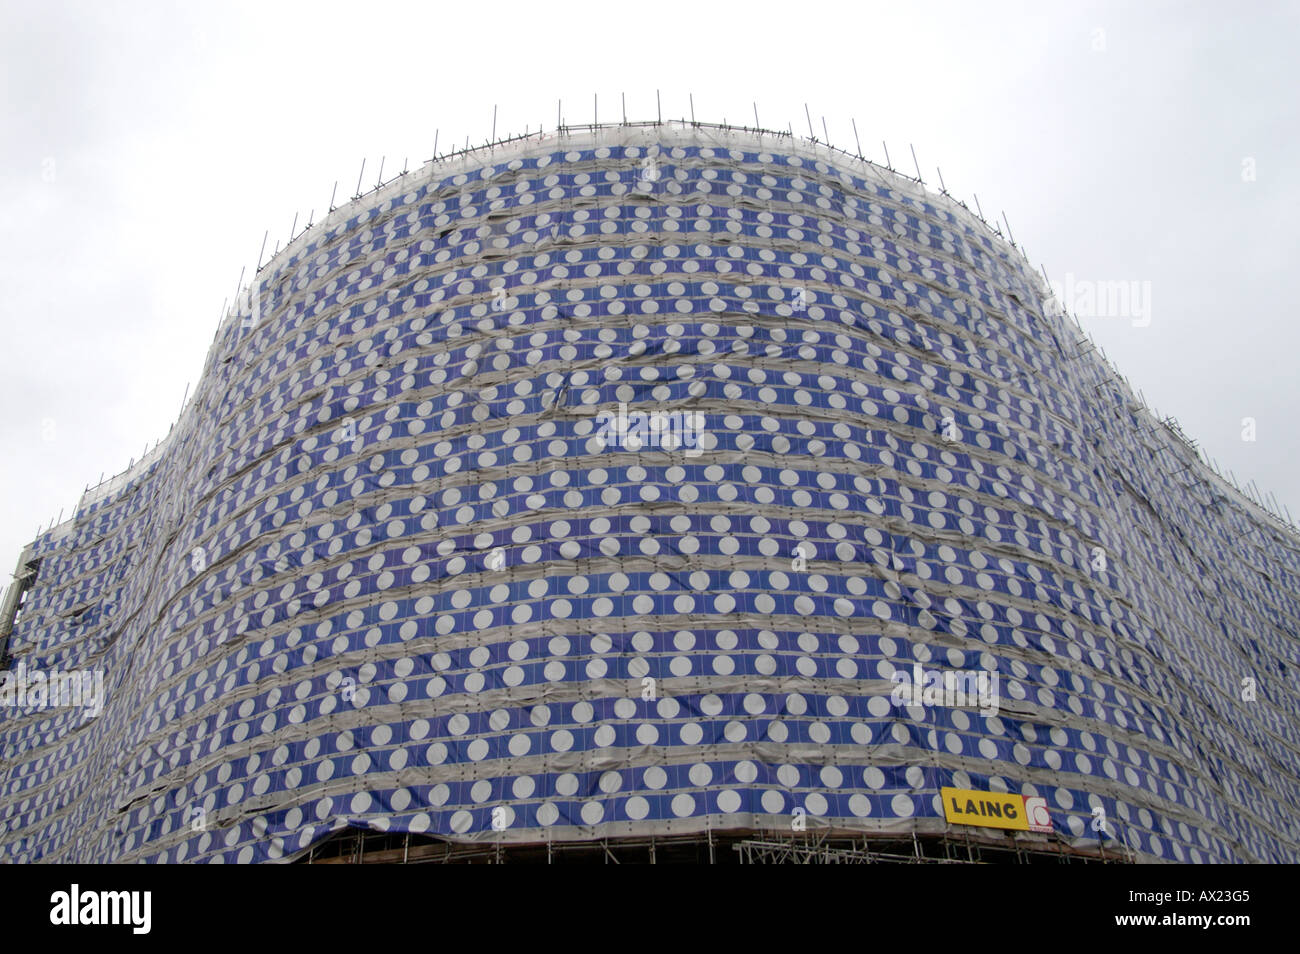 the new covered self ridges building as it was being built in Birmingham uk the covering reflected the new circular structure on Stock Photo